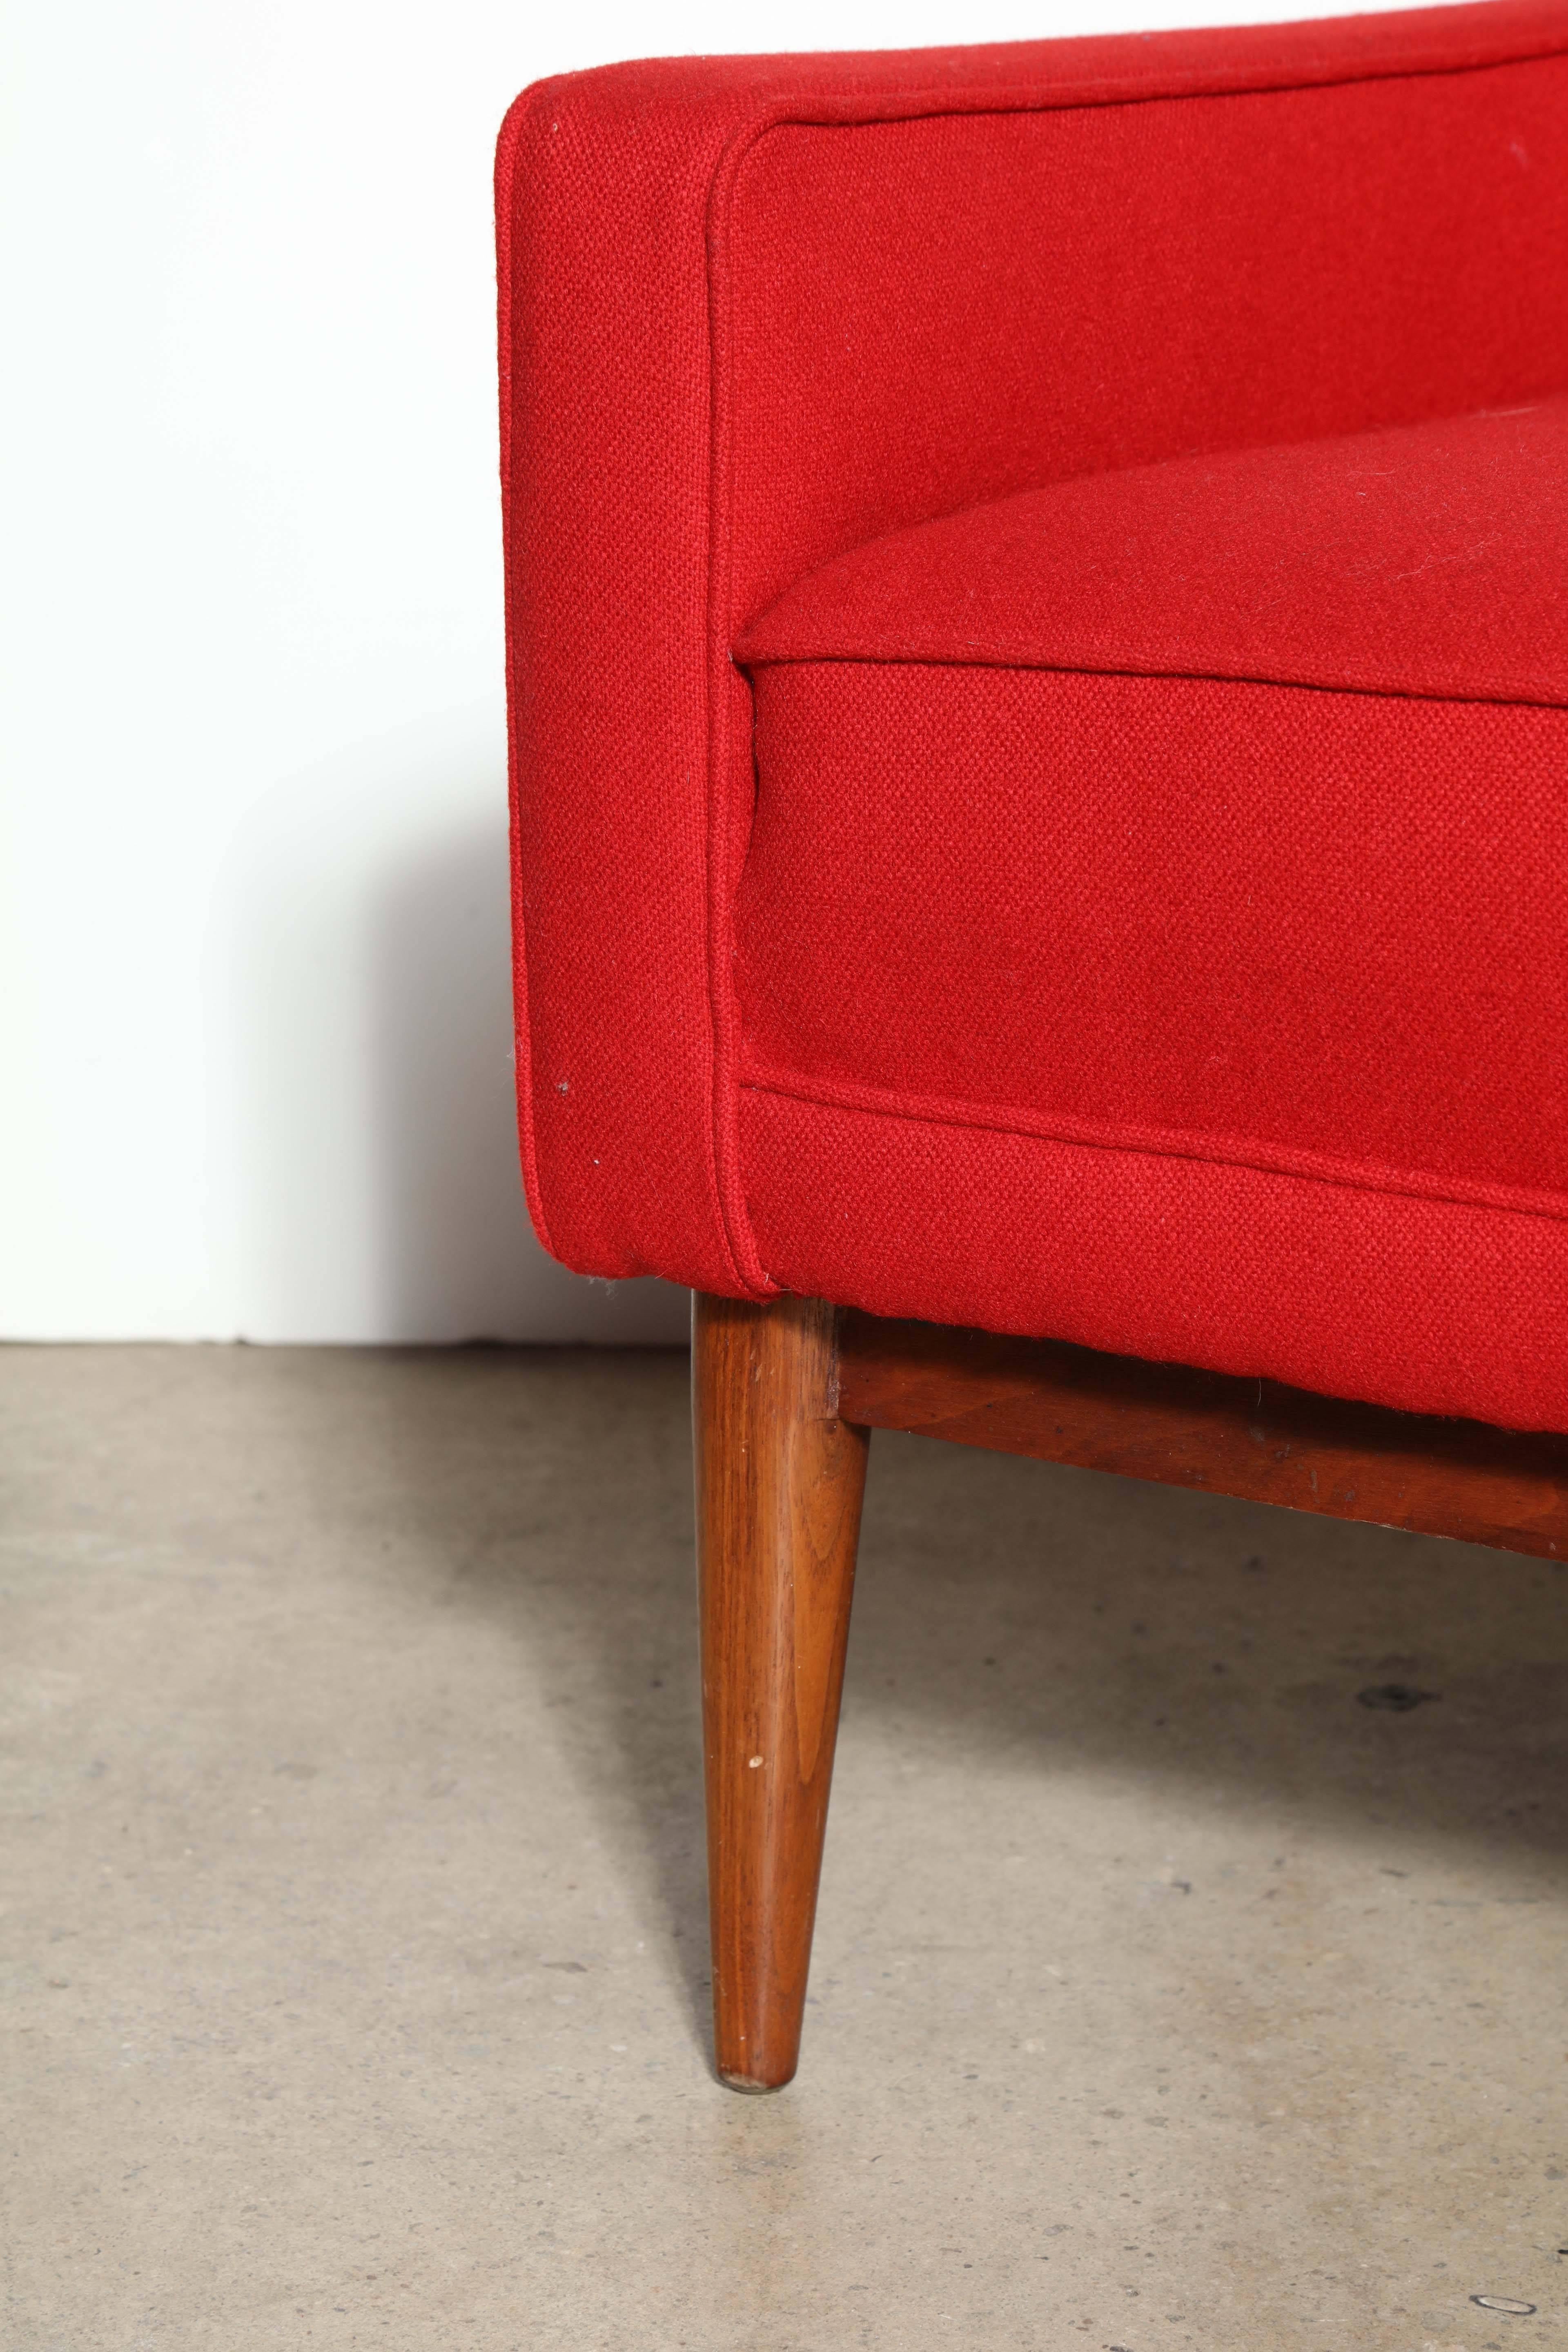 1956 designed sculptural and ergonomic Paul McCobb for Directional model 1312 high back club chair with walnut frame and red wool upholstery. Arm height 21